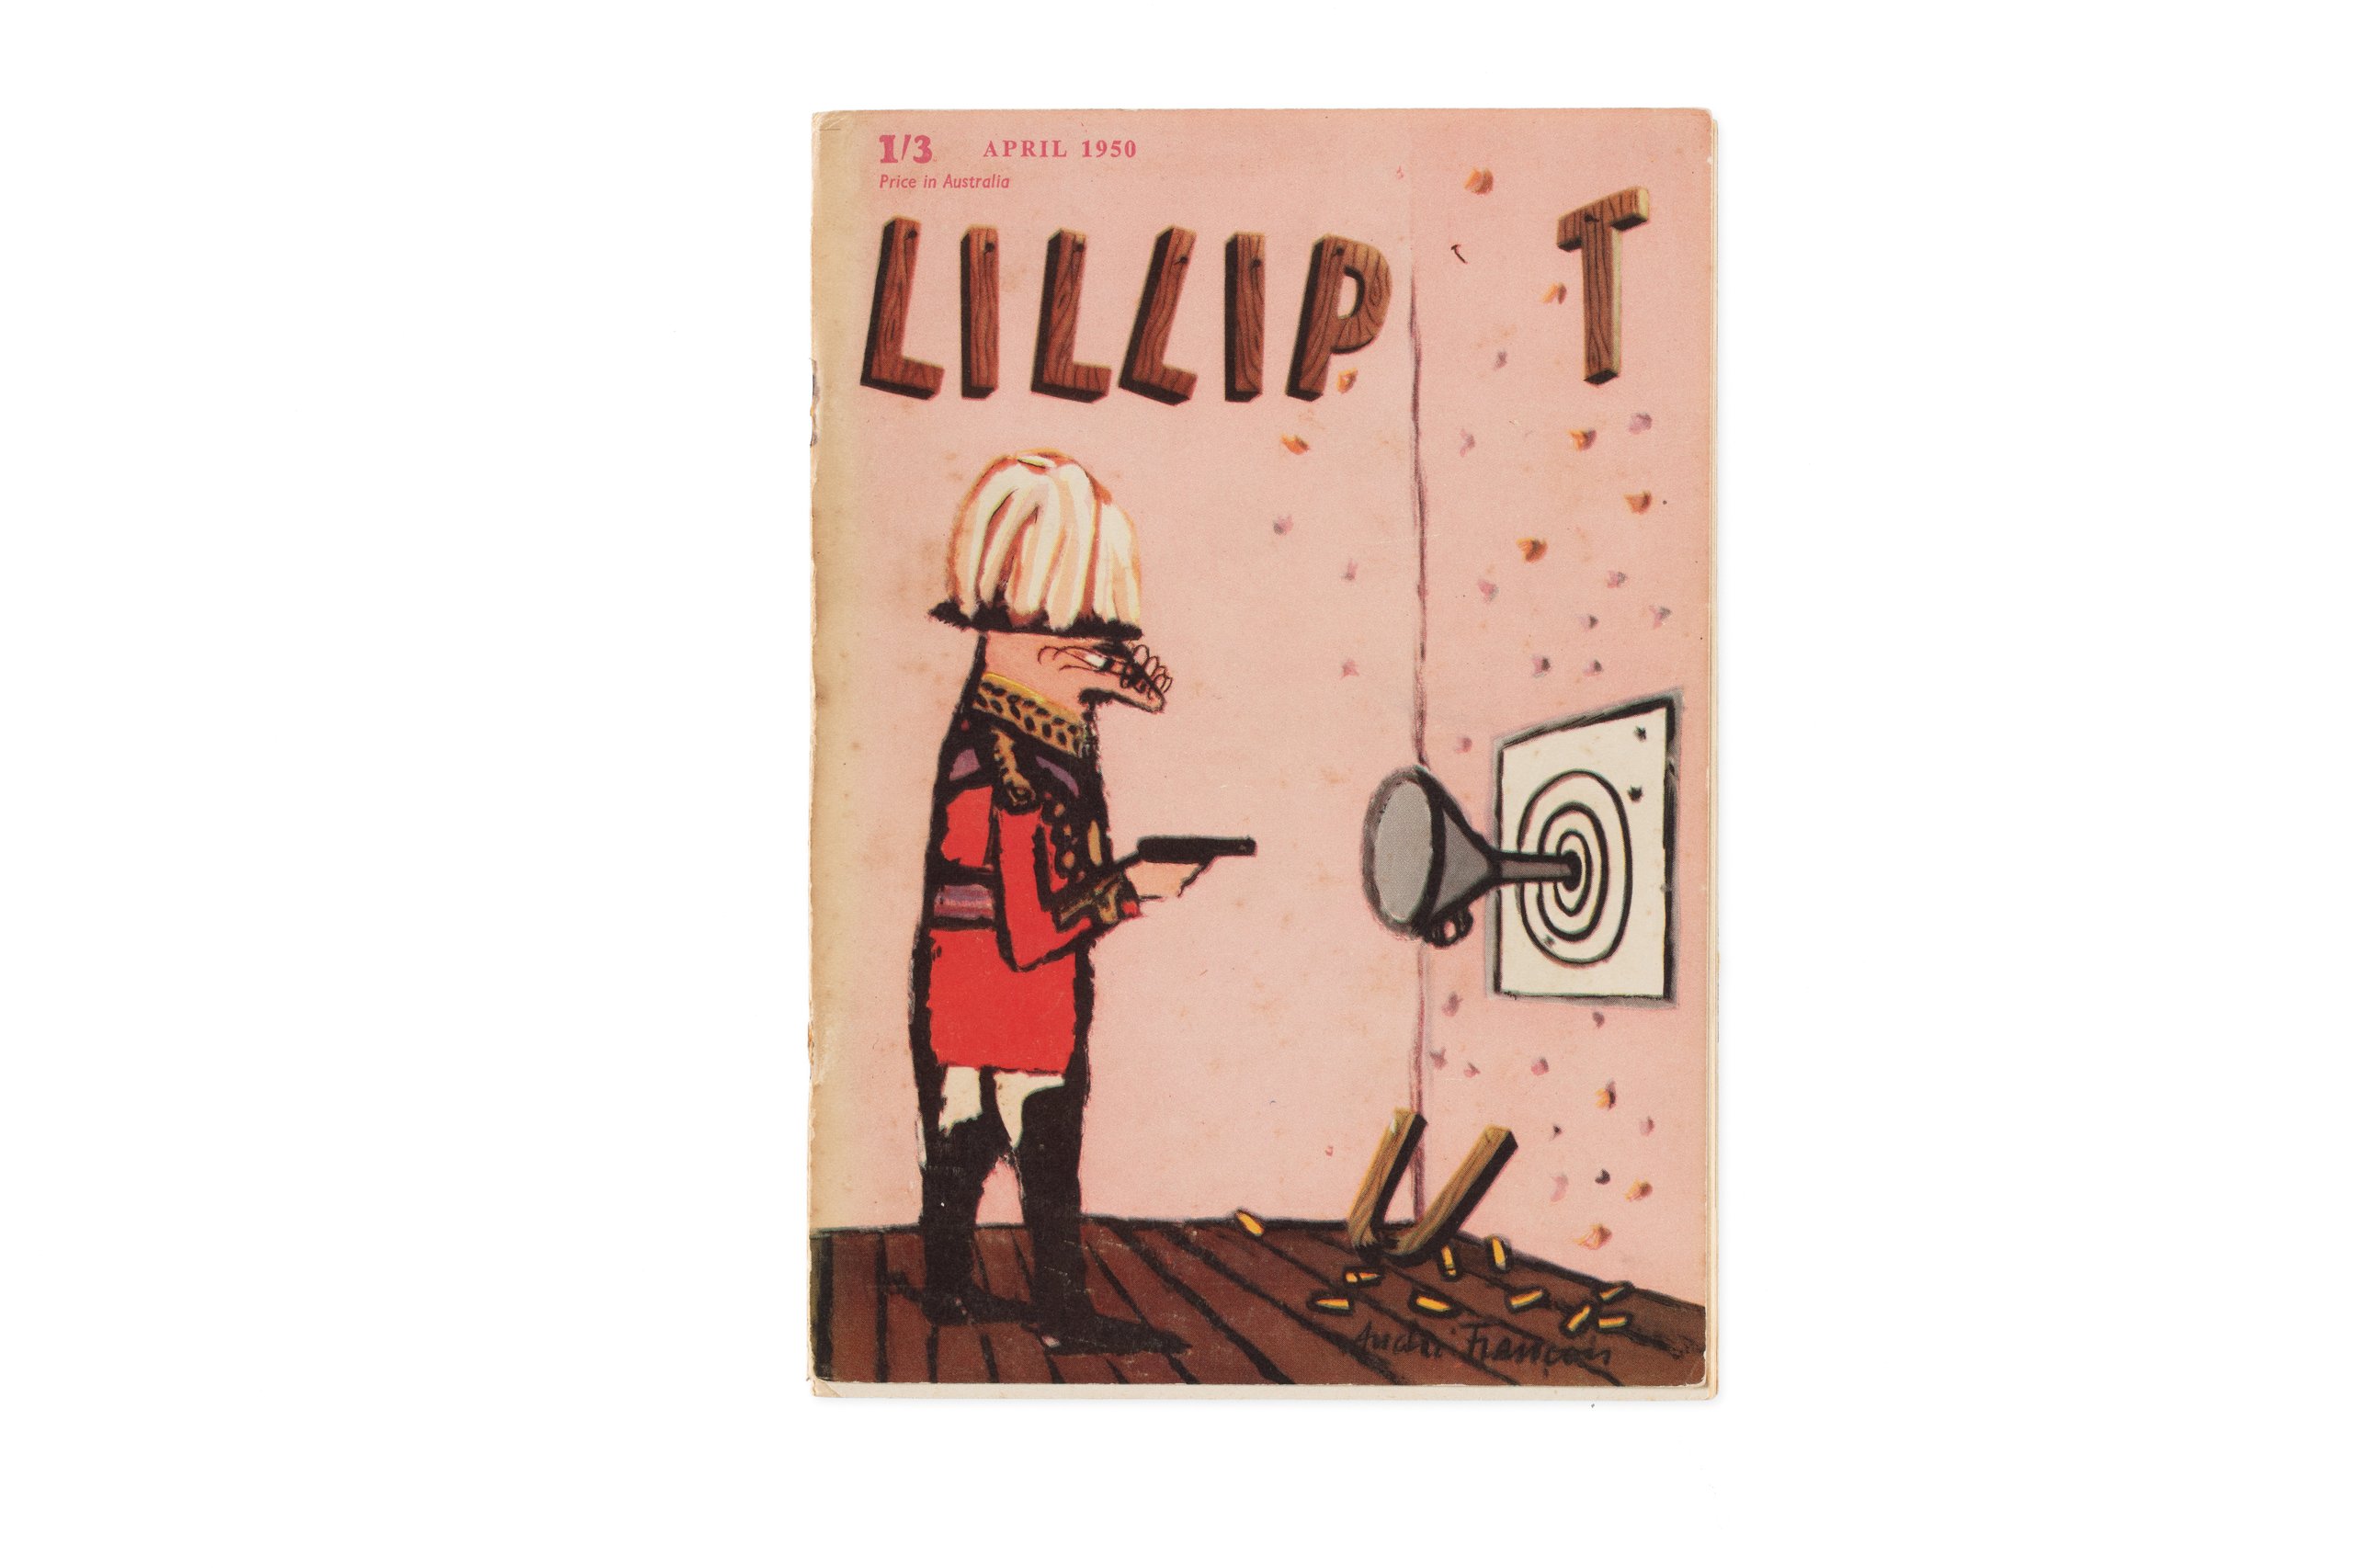 Lilliput journal featuring paintings by Dahl Collings